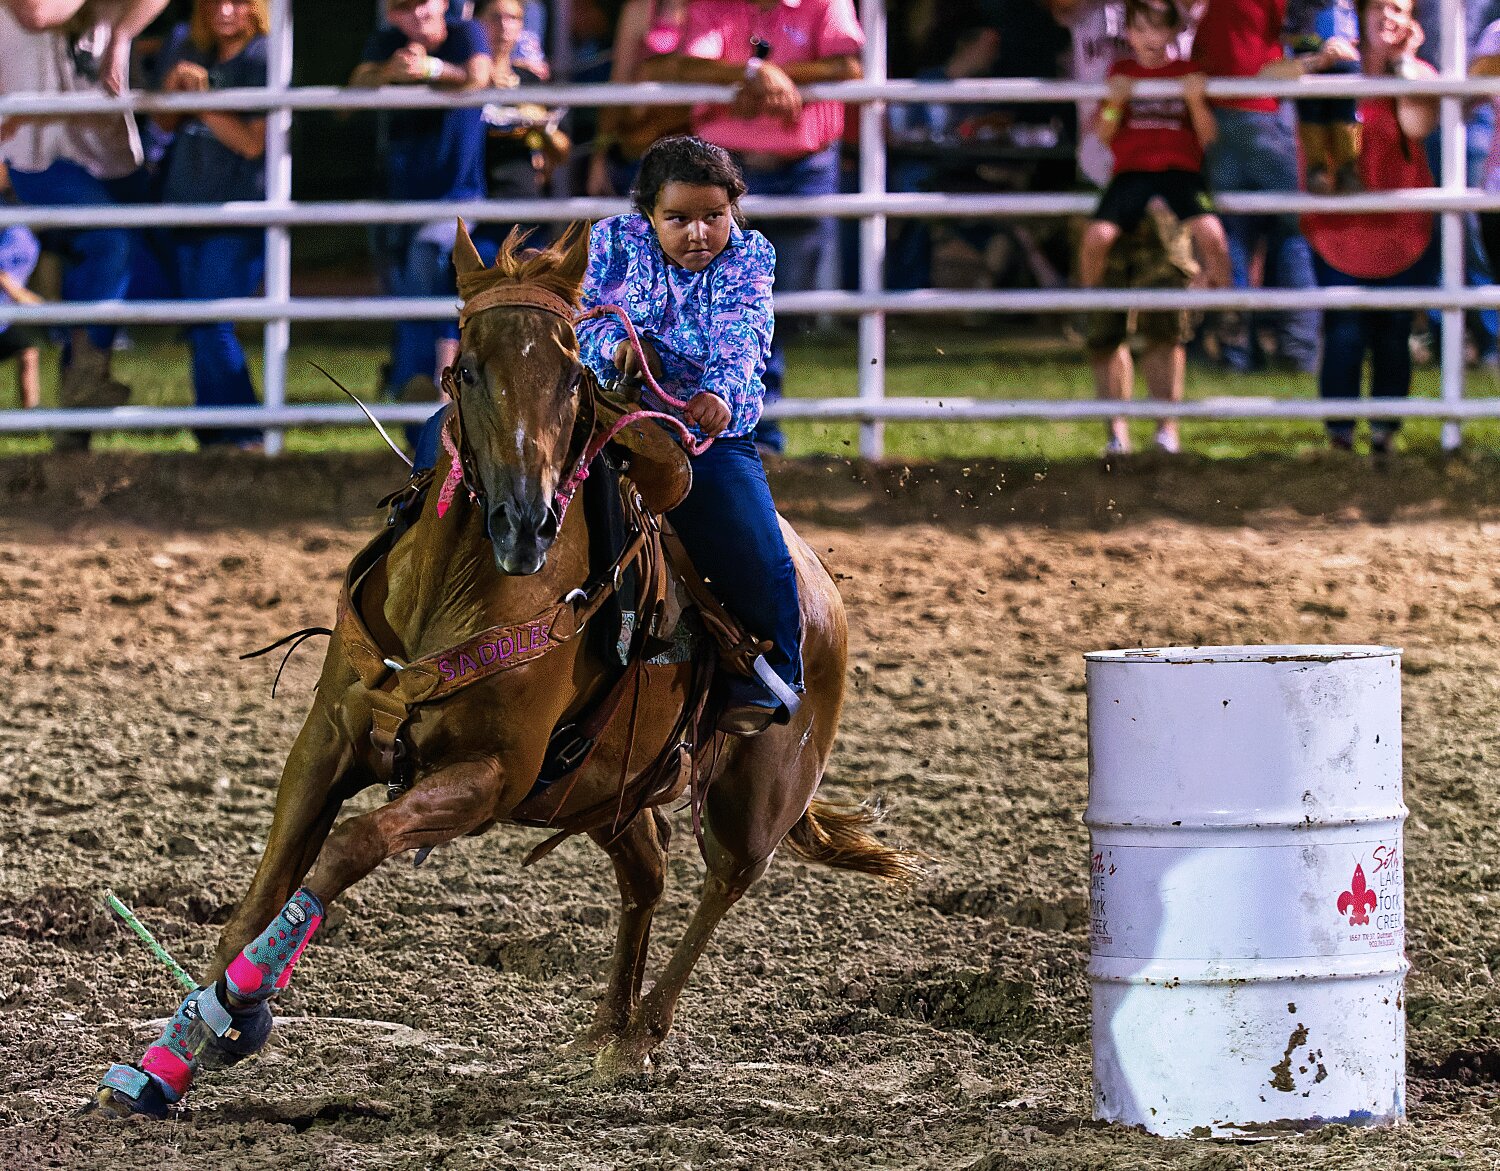 Undeterred by a slow start, the barrel-racer closes strong around the final turn. [see more sights and MFDR 2023 rodeo action]